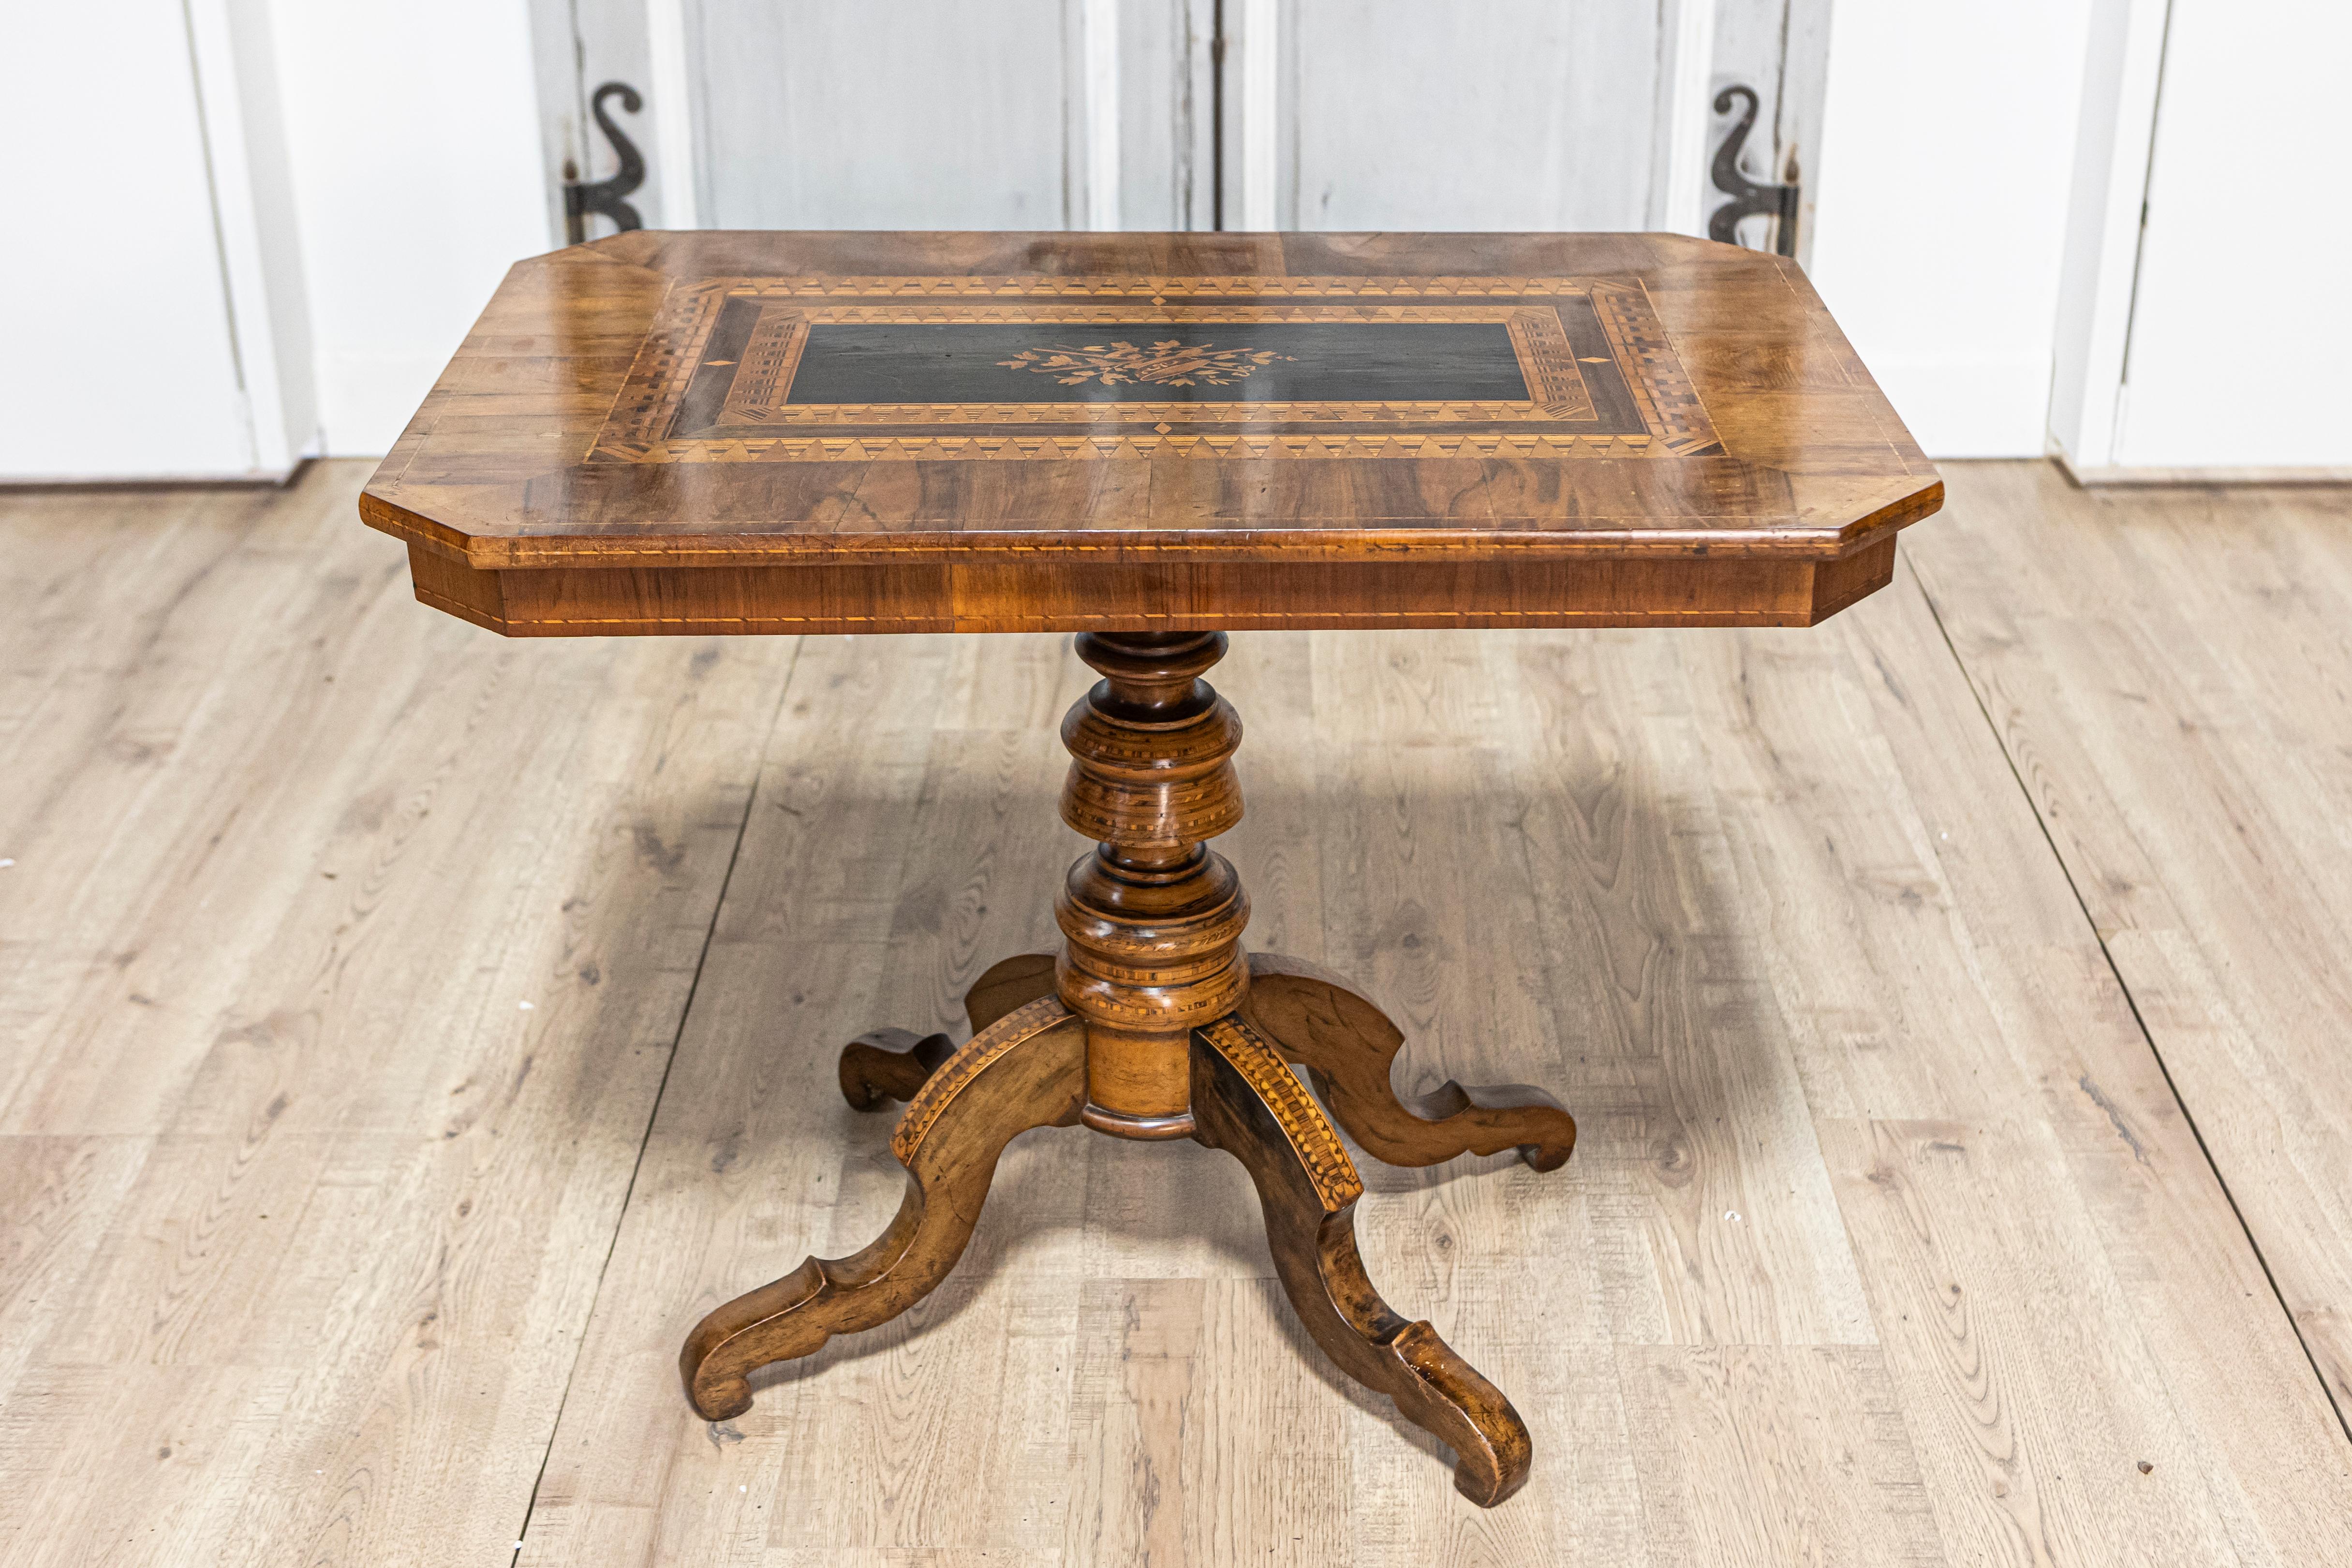 Italian 19th Century Walnut and Mahogany Center Table with Floral Marquetry For Sale 8